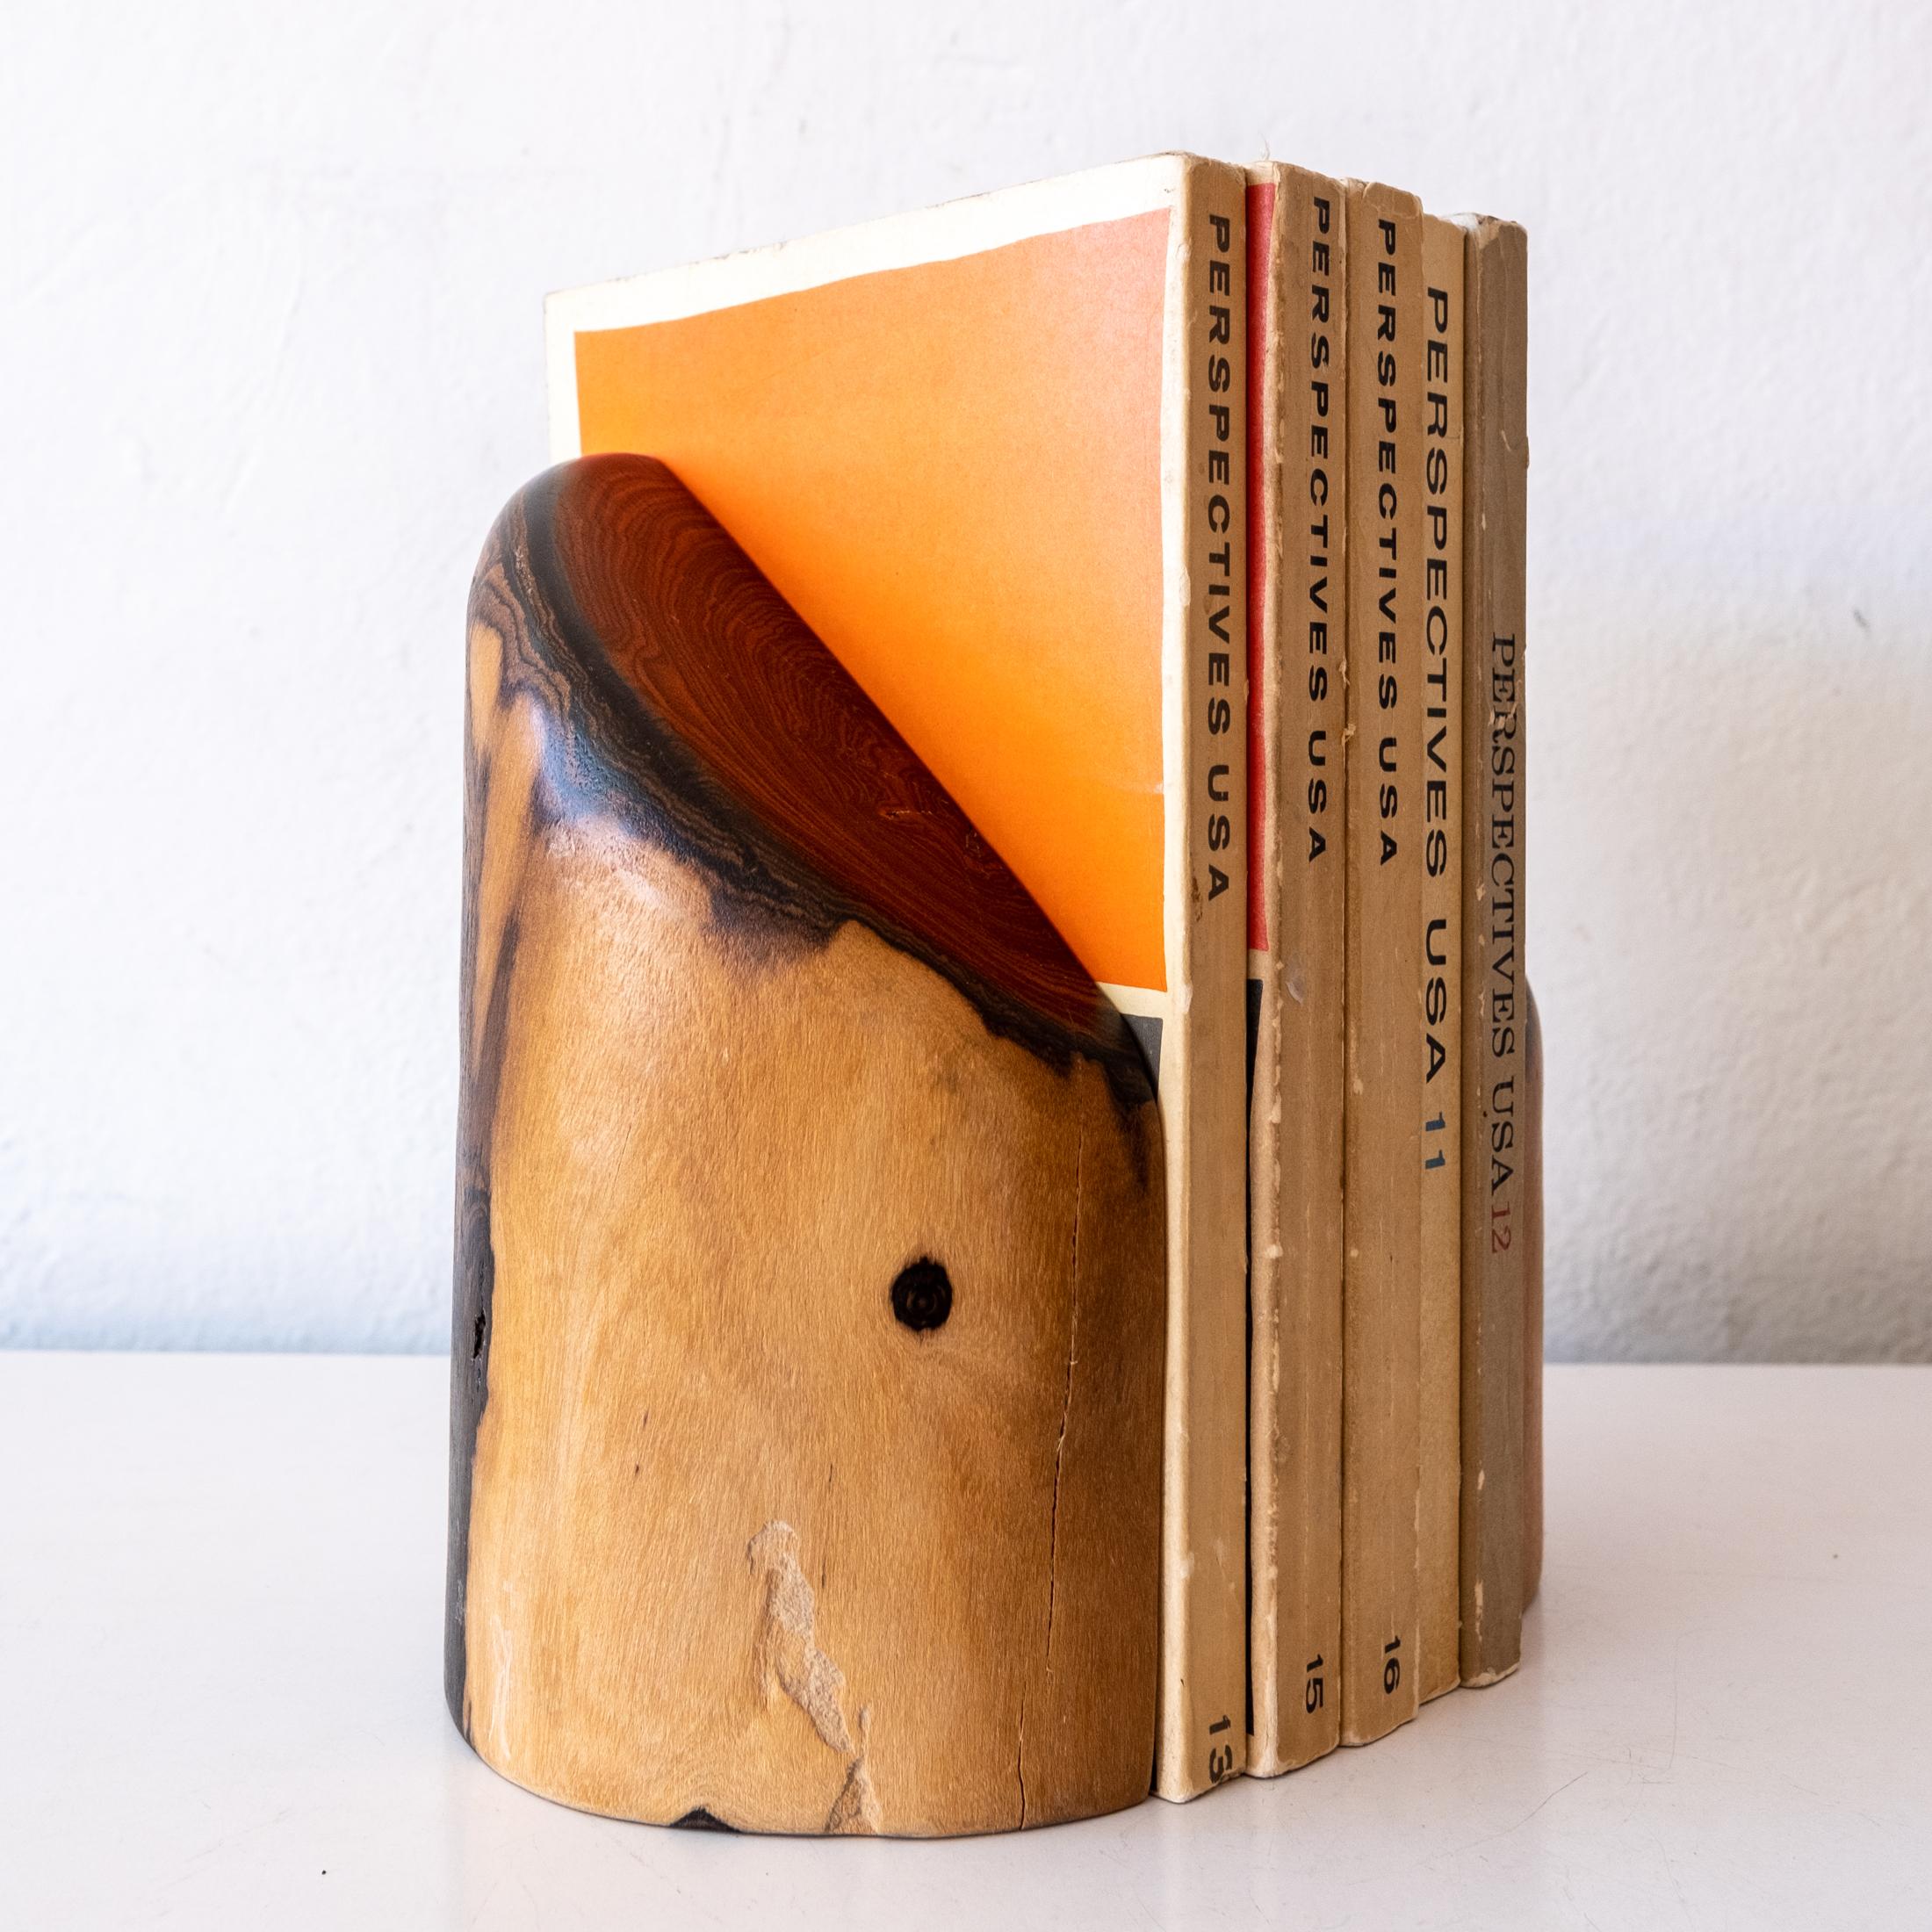 Hand carved bookends in Cocobolo by Mexican Modernist Don Shoemaker. Retains original labels from his workshop in Señal Mexico. This design was included in the 2017 Don S. Shoemaker exhibition at the Museo de Arte Moderno in Mexico City.